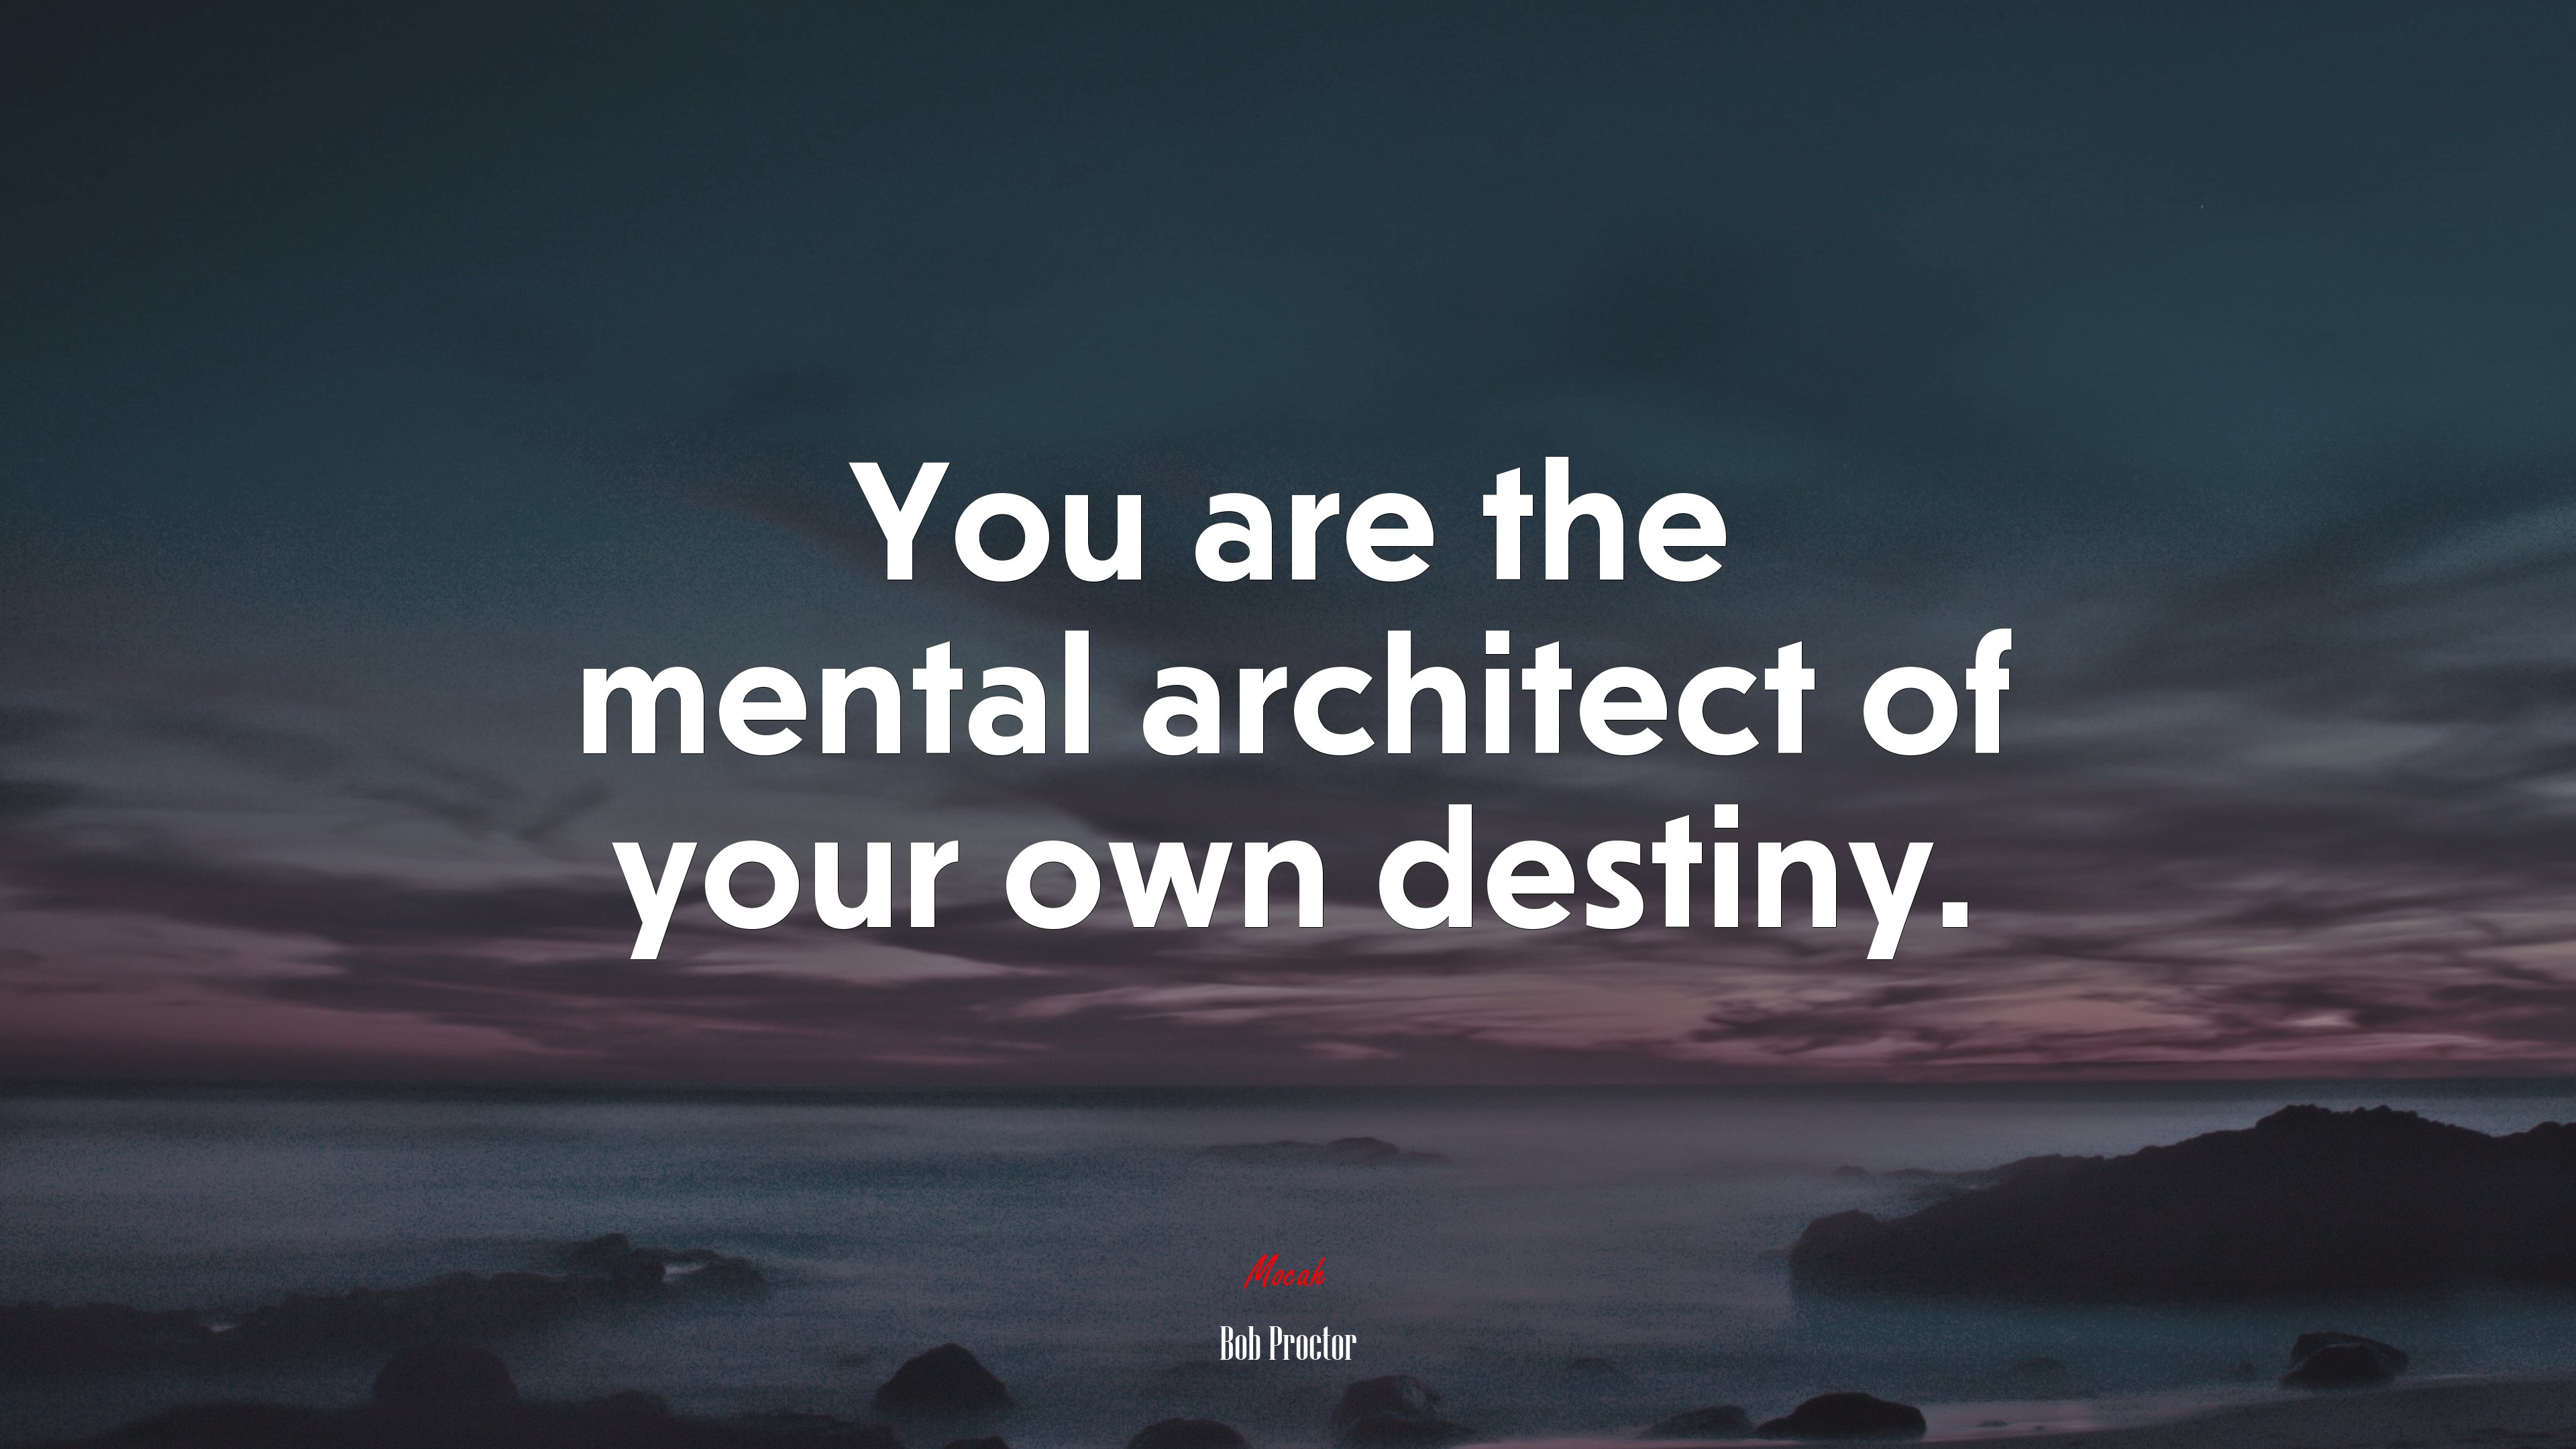 You are the mental architect of your own destiny. Bob Proctor quote Gallery HD Wallpaper